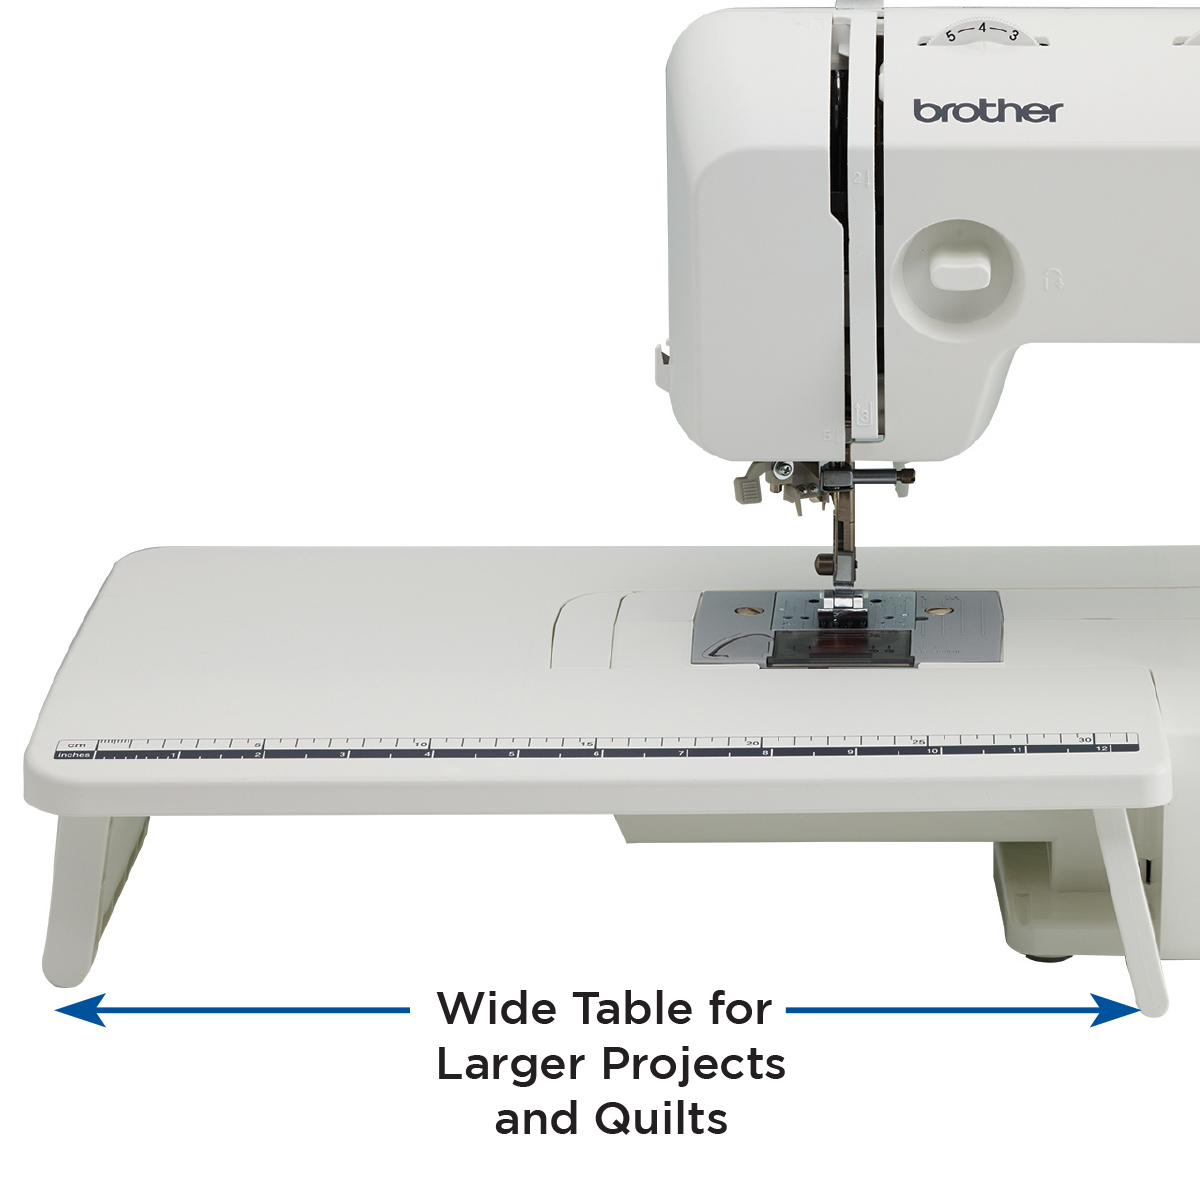 Brother XR3774 Sewing And Quilting Machine with Wide Table and Built-in Stitches - image 4 of 12